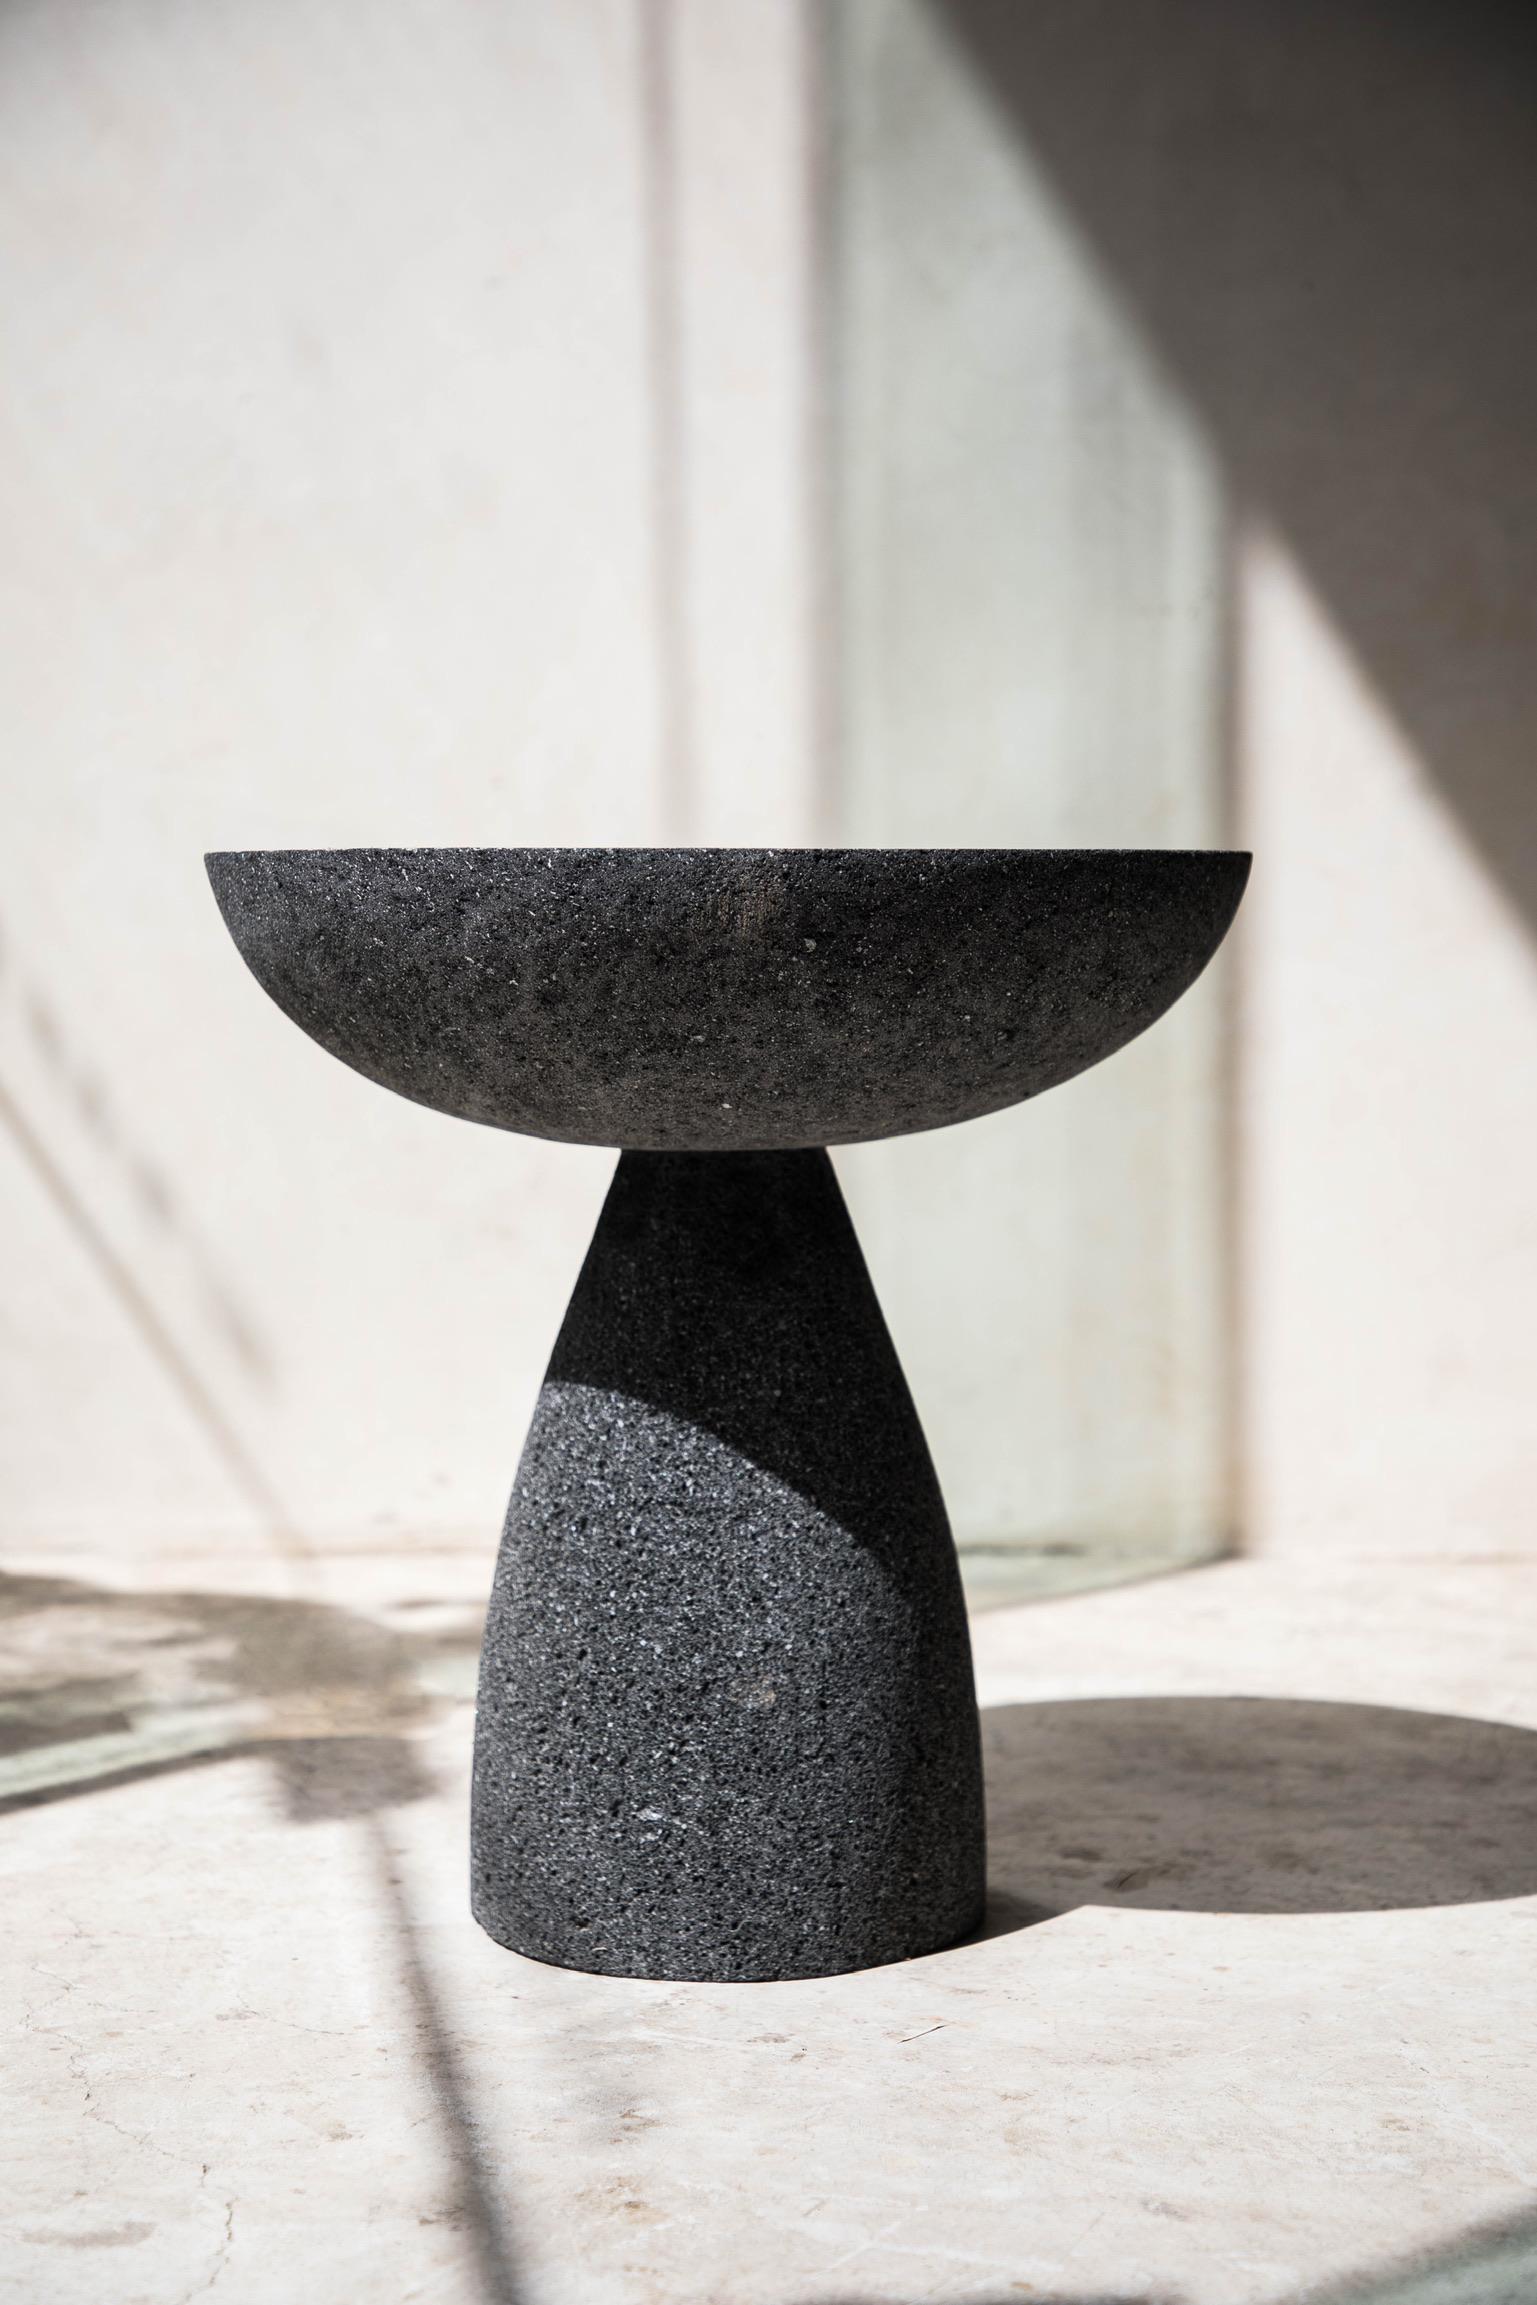 Stone totem 13 by Daniel Orozco
Material: Volcanic rock.
Dimensions: D 35 x H 45 cm

Volvanic rock Totem.

Daniel Orozco Estudio
We are an inclusive interior design estudio, who love to work with fabrics and natural textiles in makes our